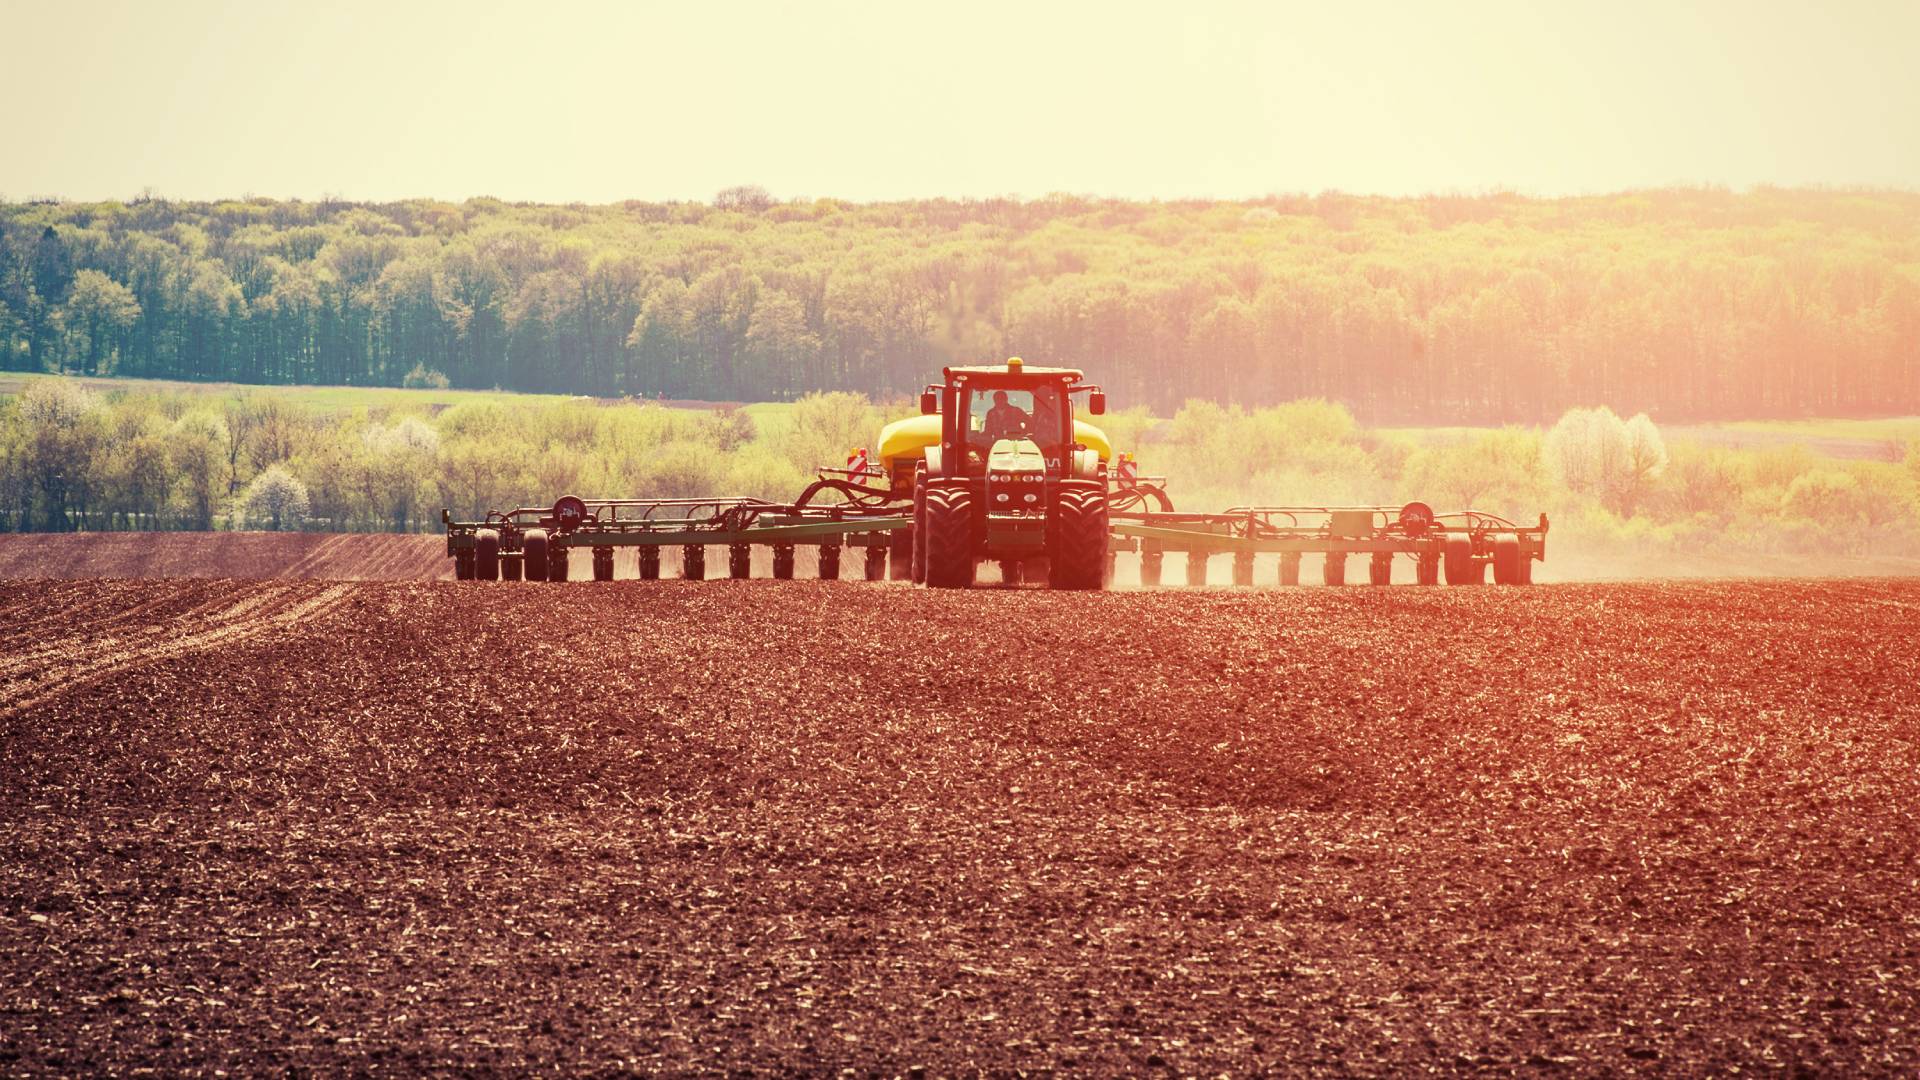 A farmer uses a tractor to plow a field so it is ready for them and workers to place seeds in later in the season.